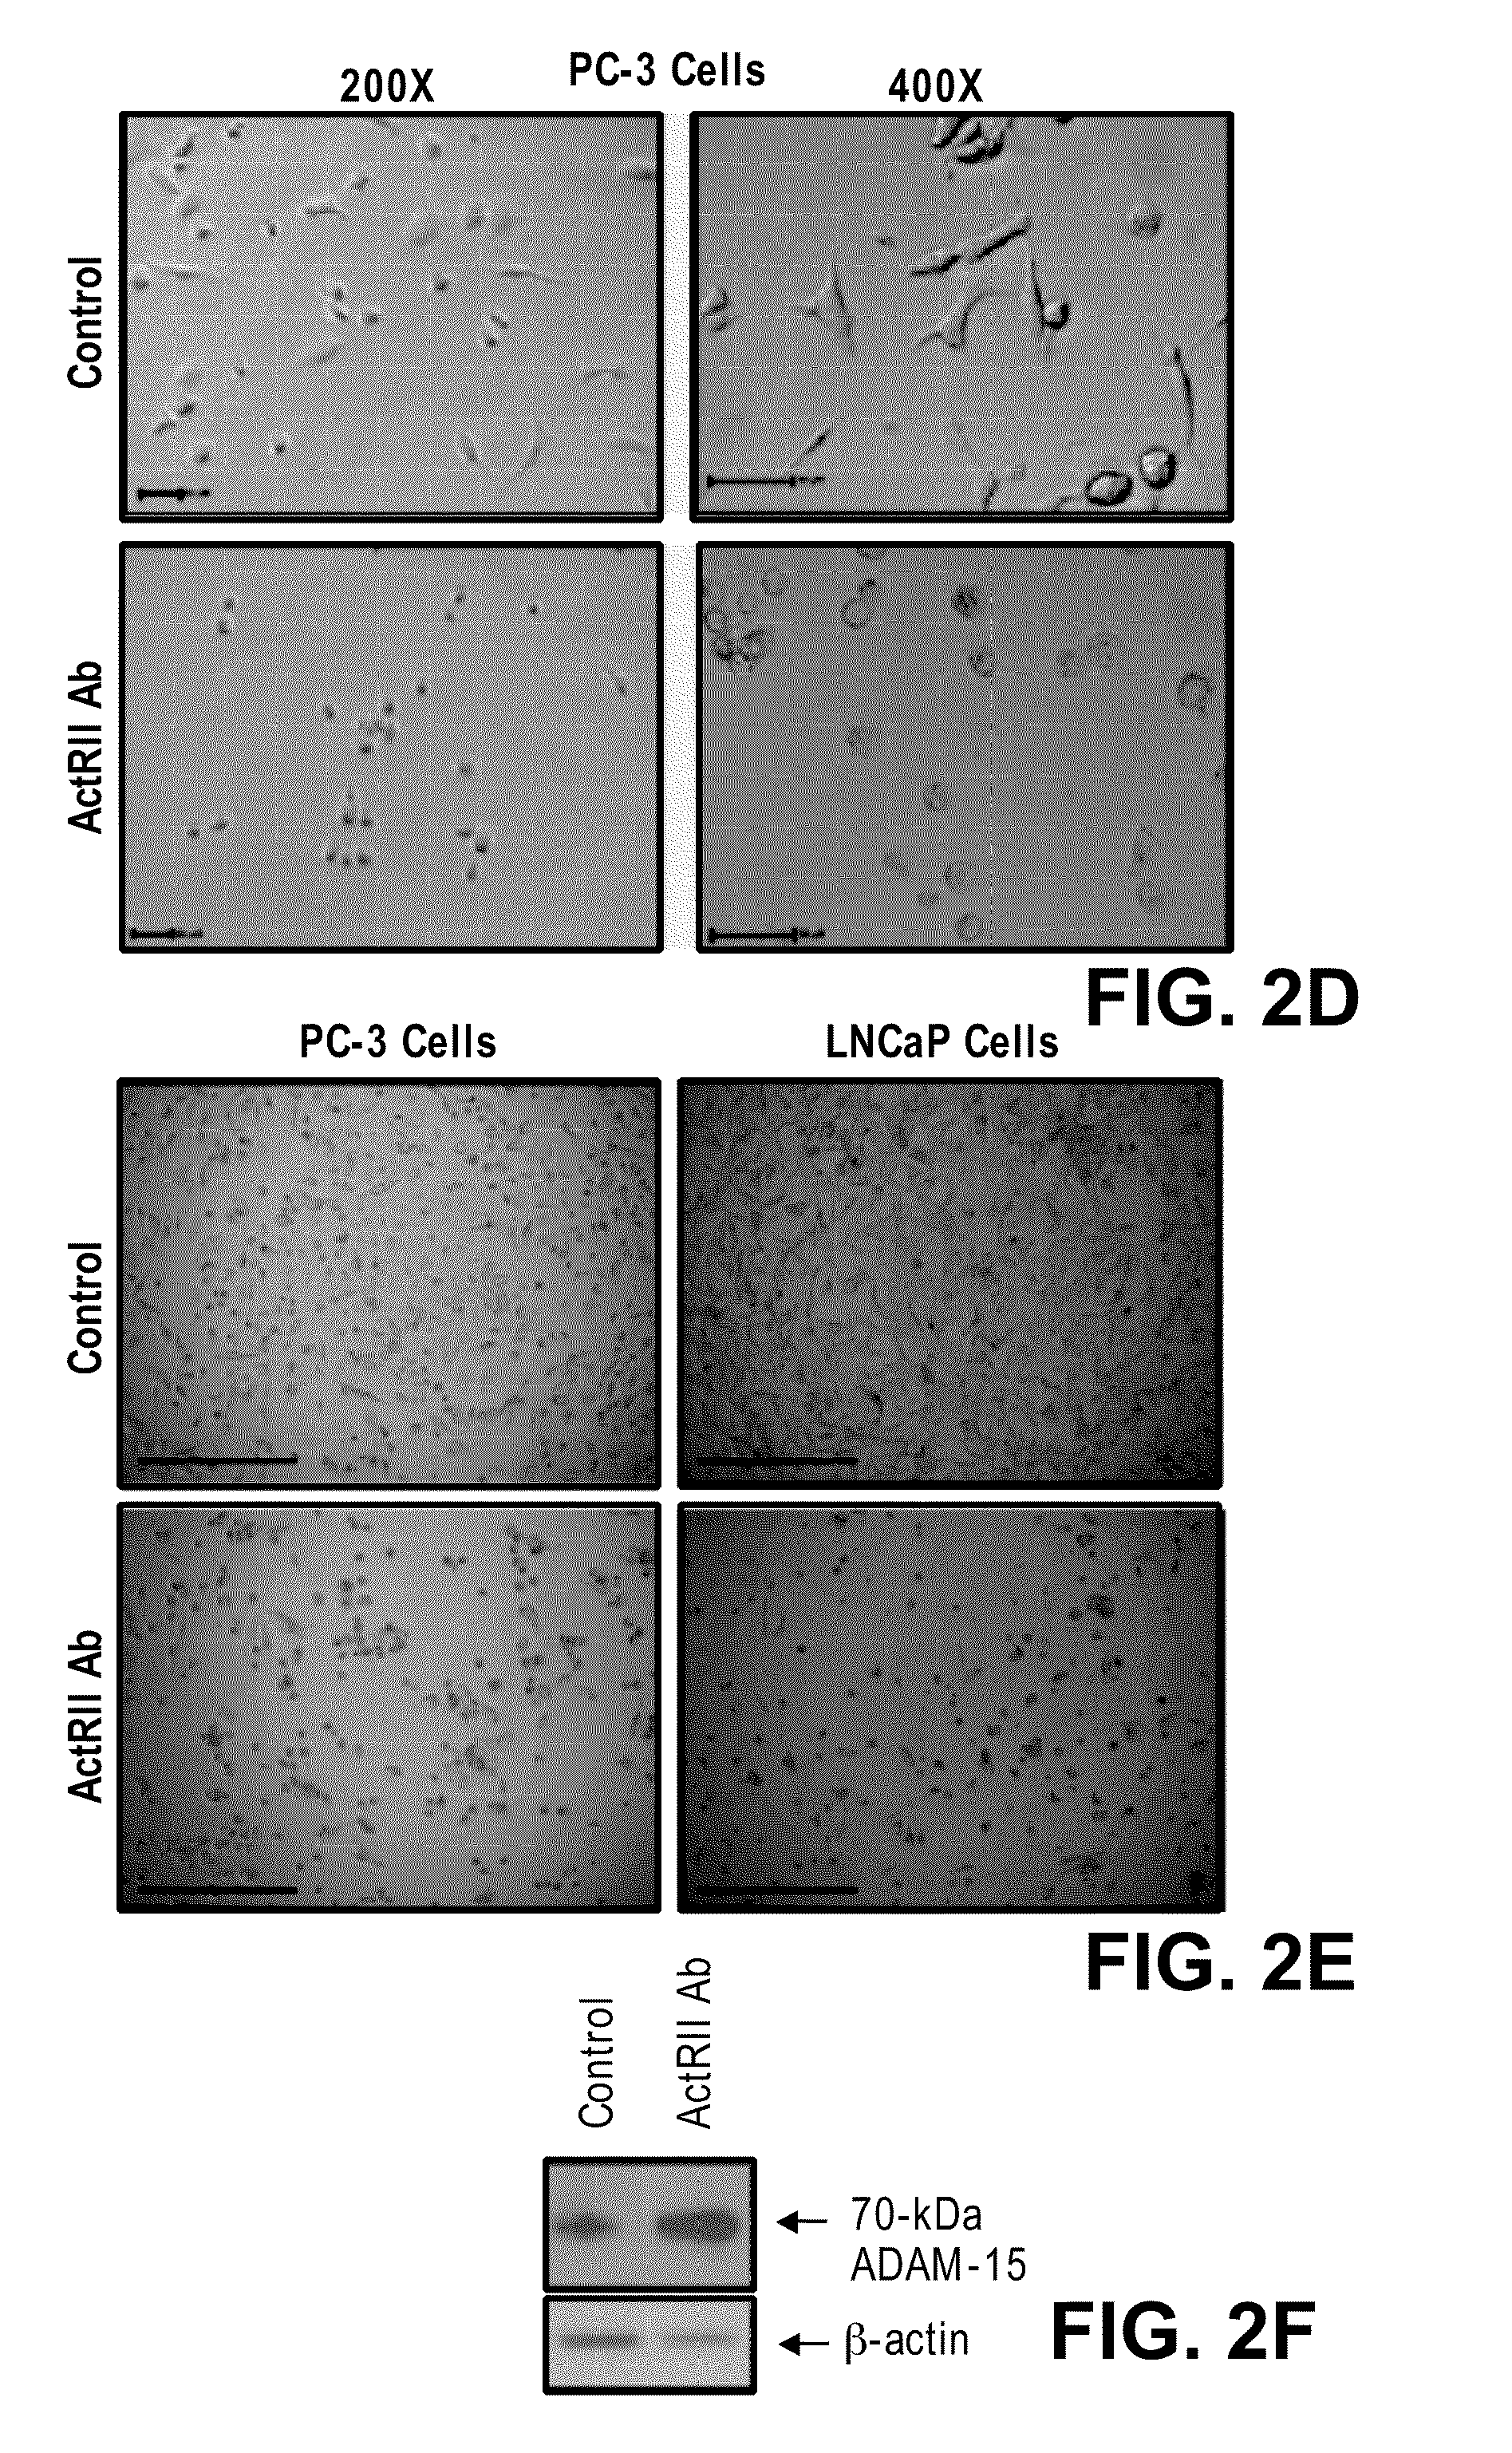 Methods for Identifying Agents that Inhibit Cell Migration, Promote Cell Adhesion and Prevent Metastasis